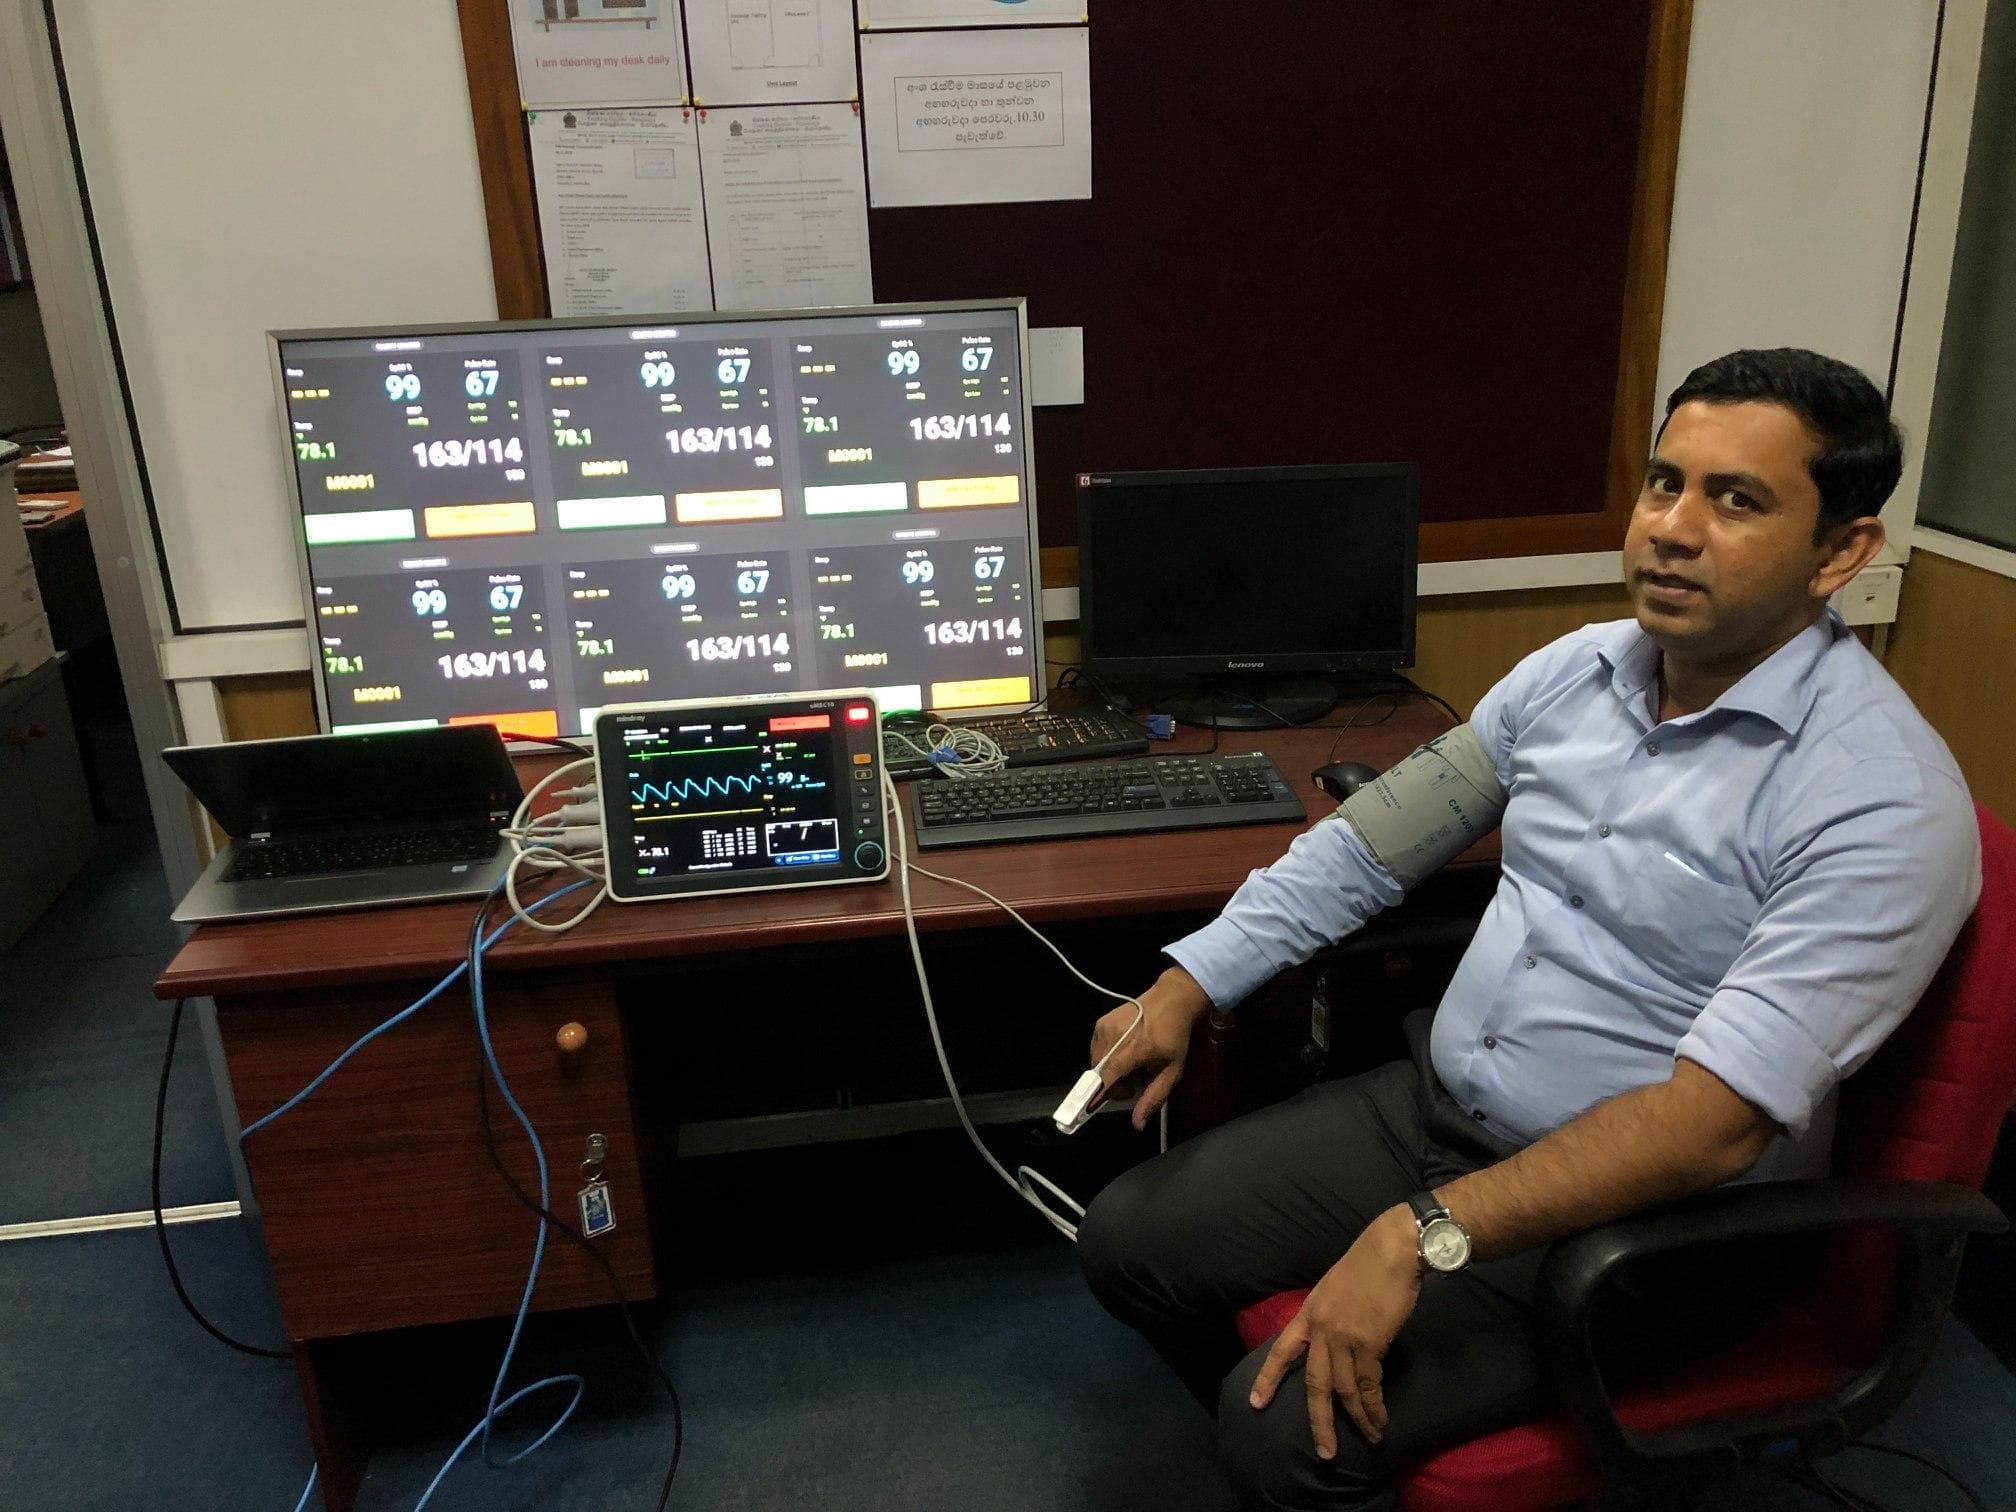 Dr. Sudarshana Wickramasinghe is testing the system